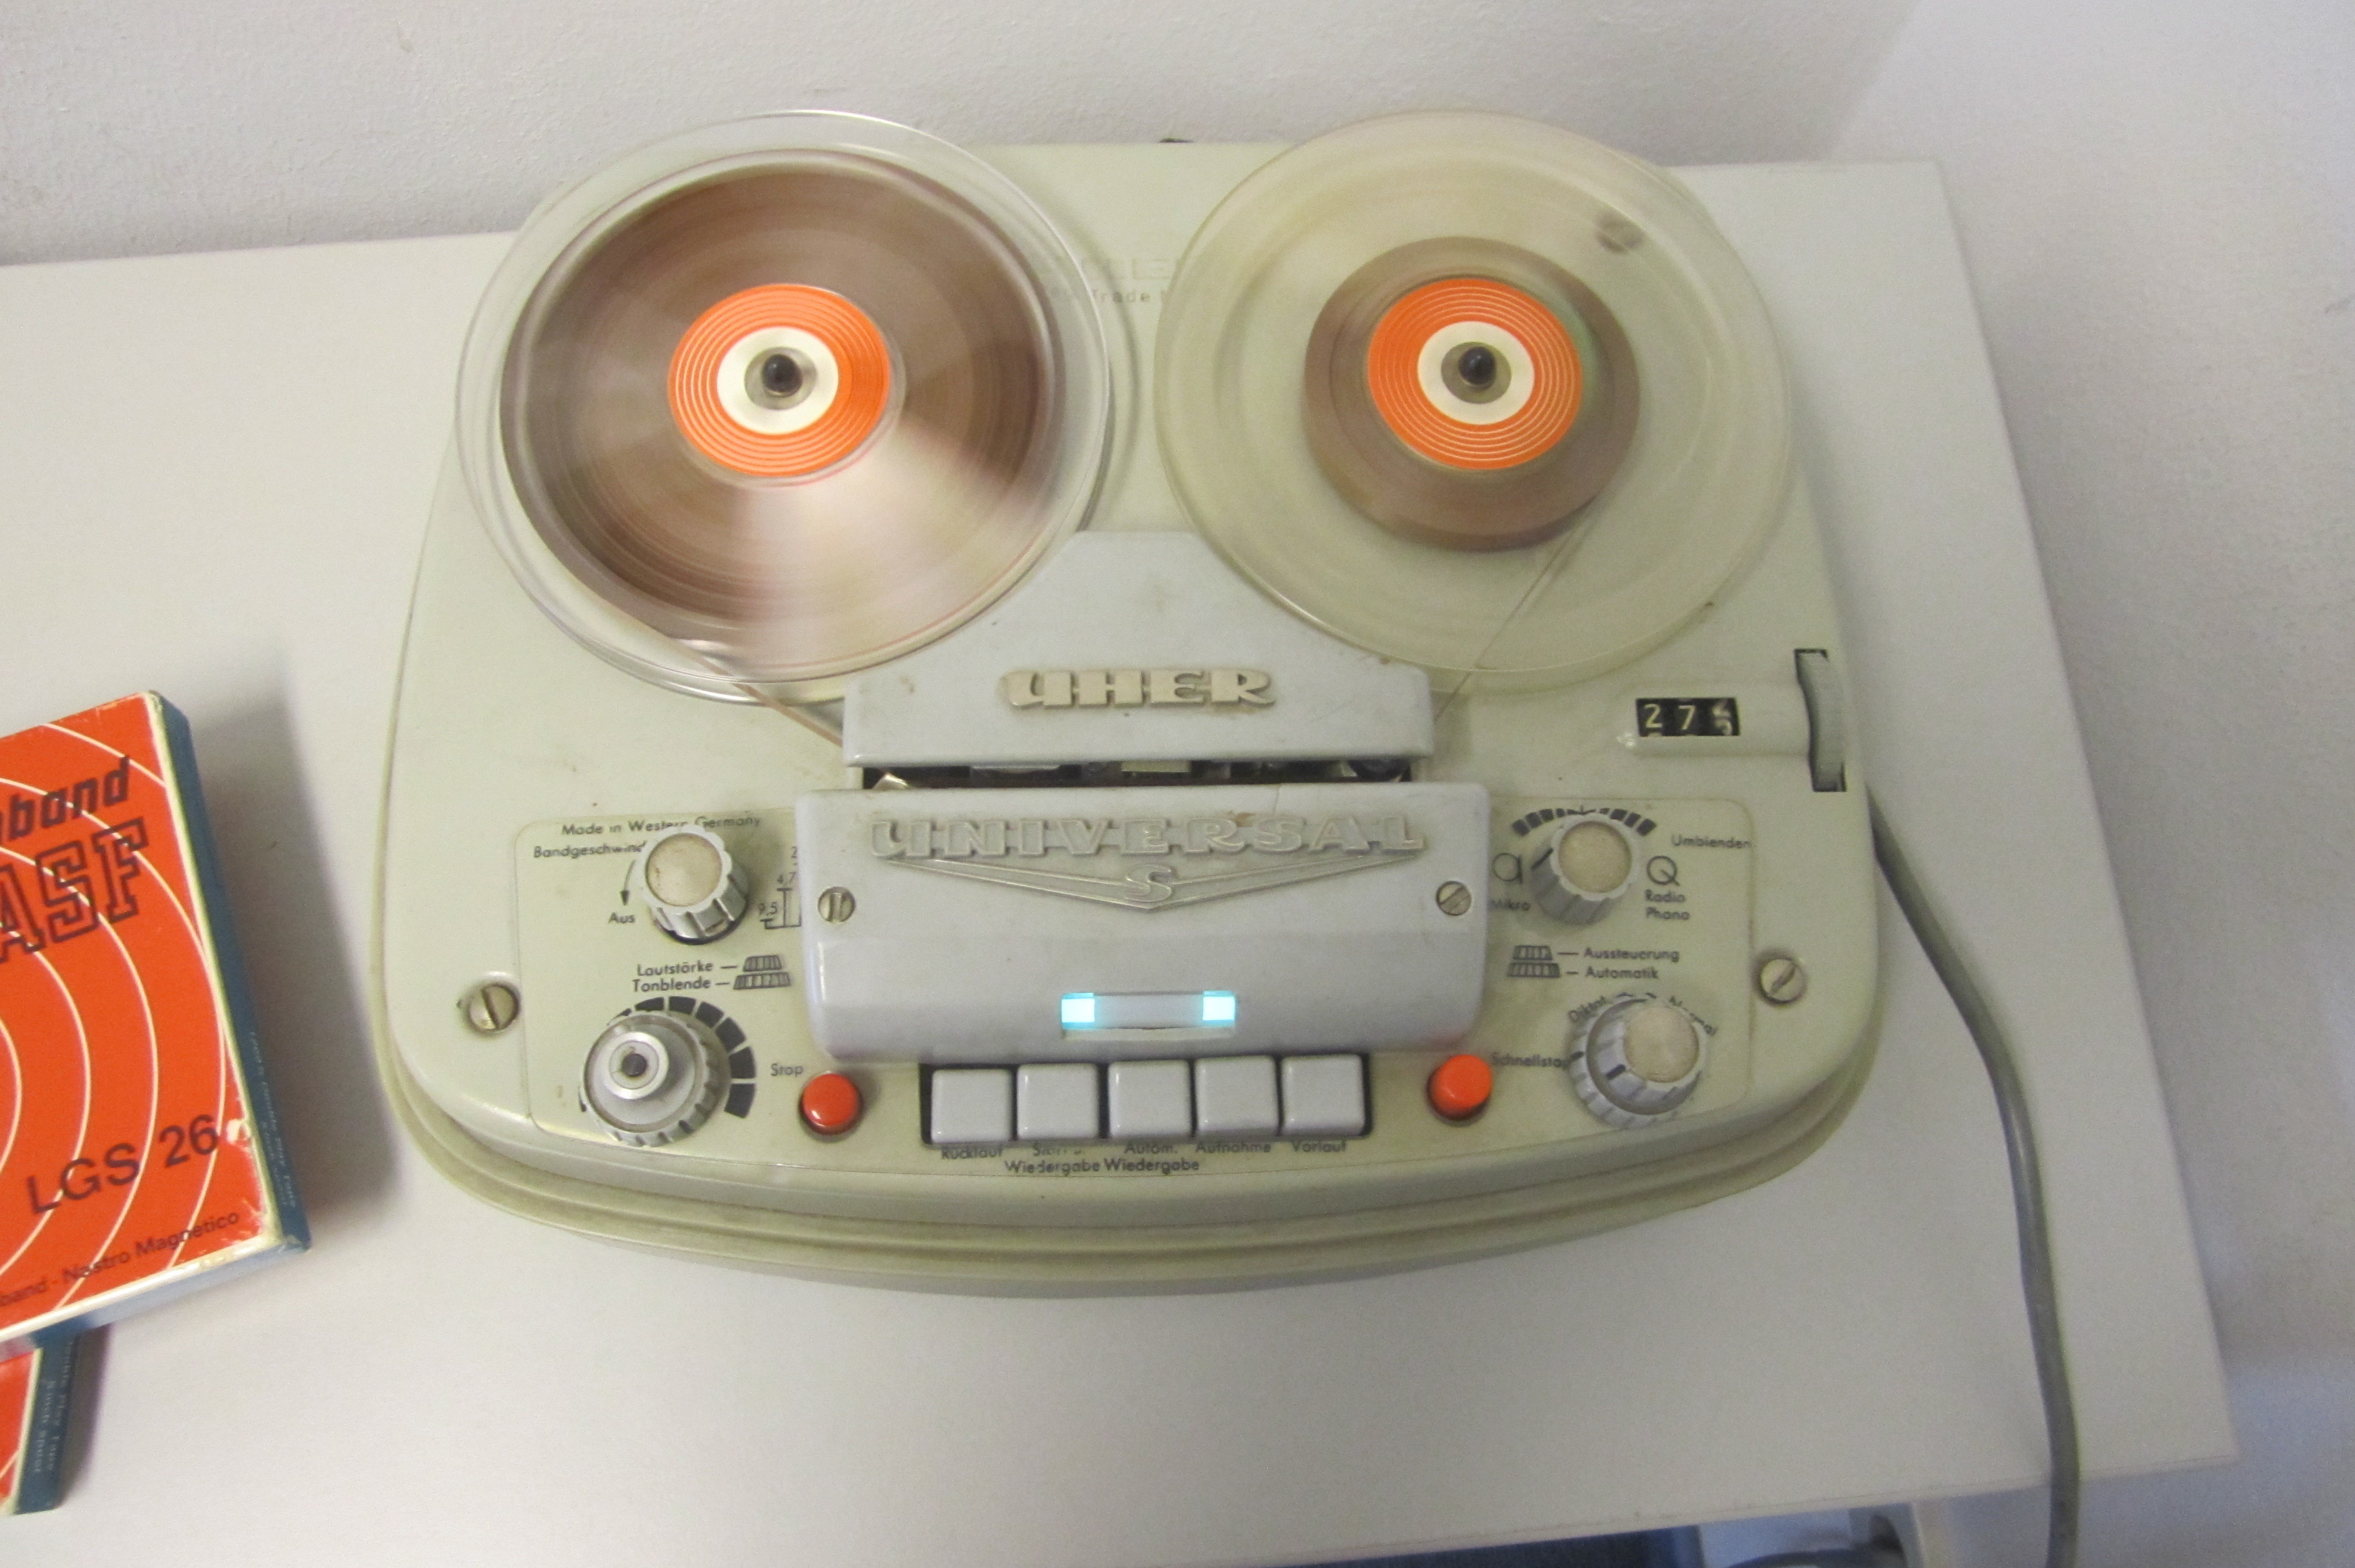 Image of a tape recorder of the type used by the BOLSA project for voice recordings